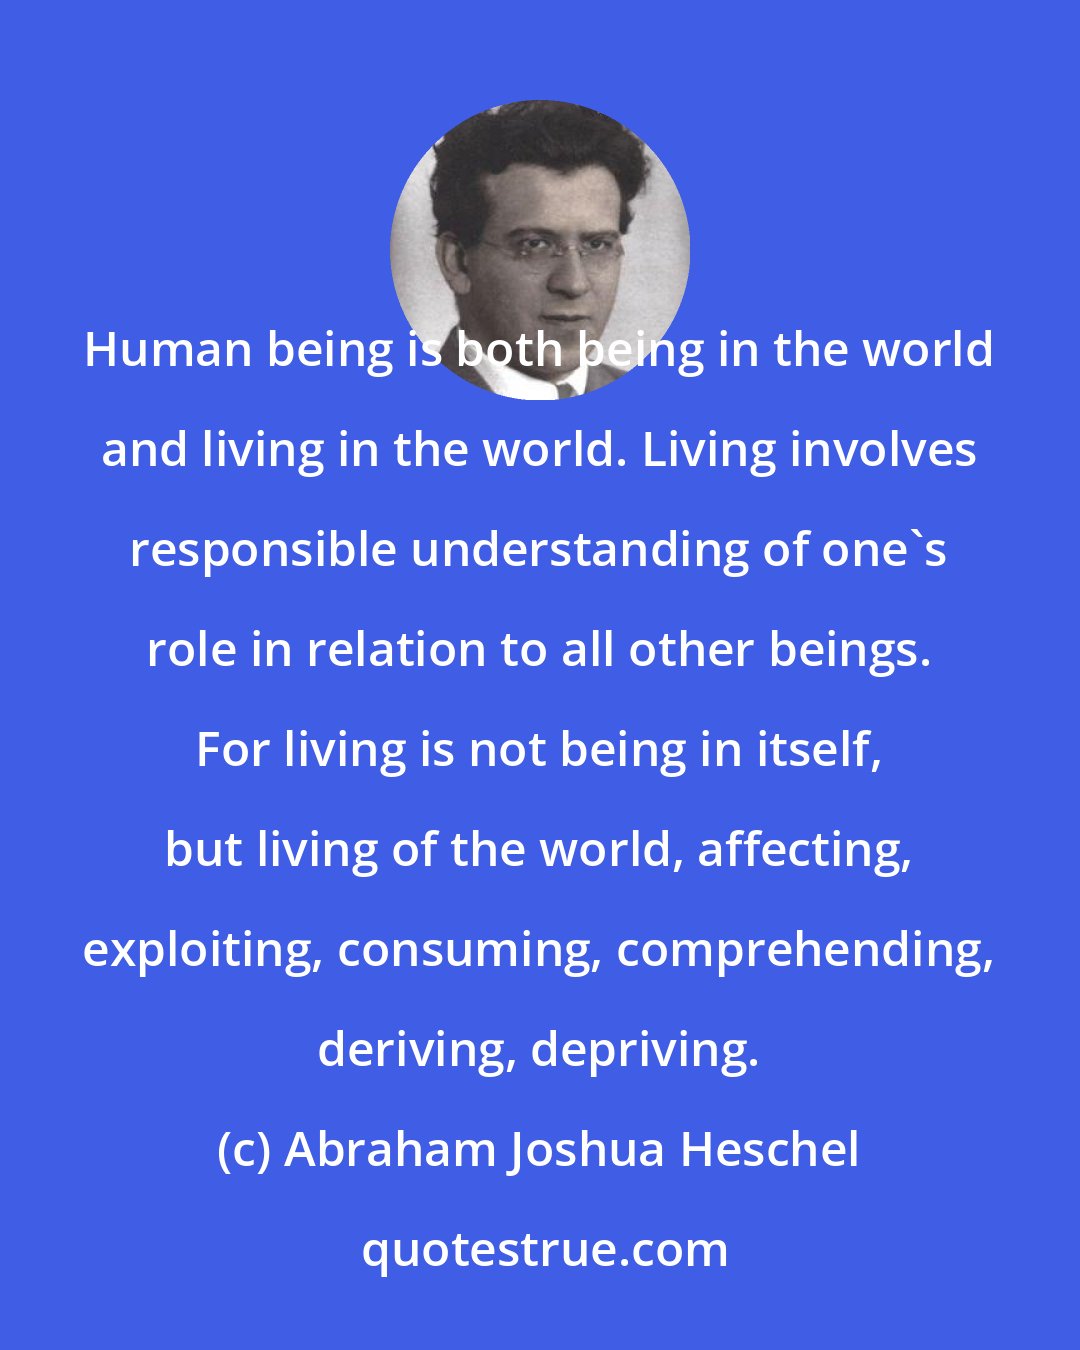 Abraham Joshua Heschel: Human being is both being in the world and living in the world. Living involves responsible understanding of one's role in relation to all other beings. For living is not being in itself, but living of the world, affecting, exploiting, consuming, comprehending, deriving, depriving.